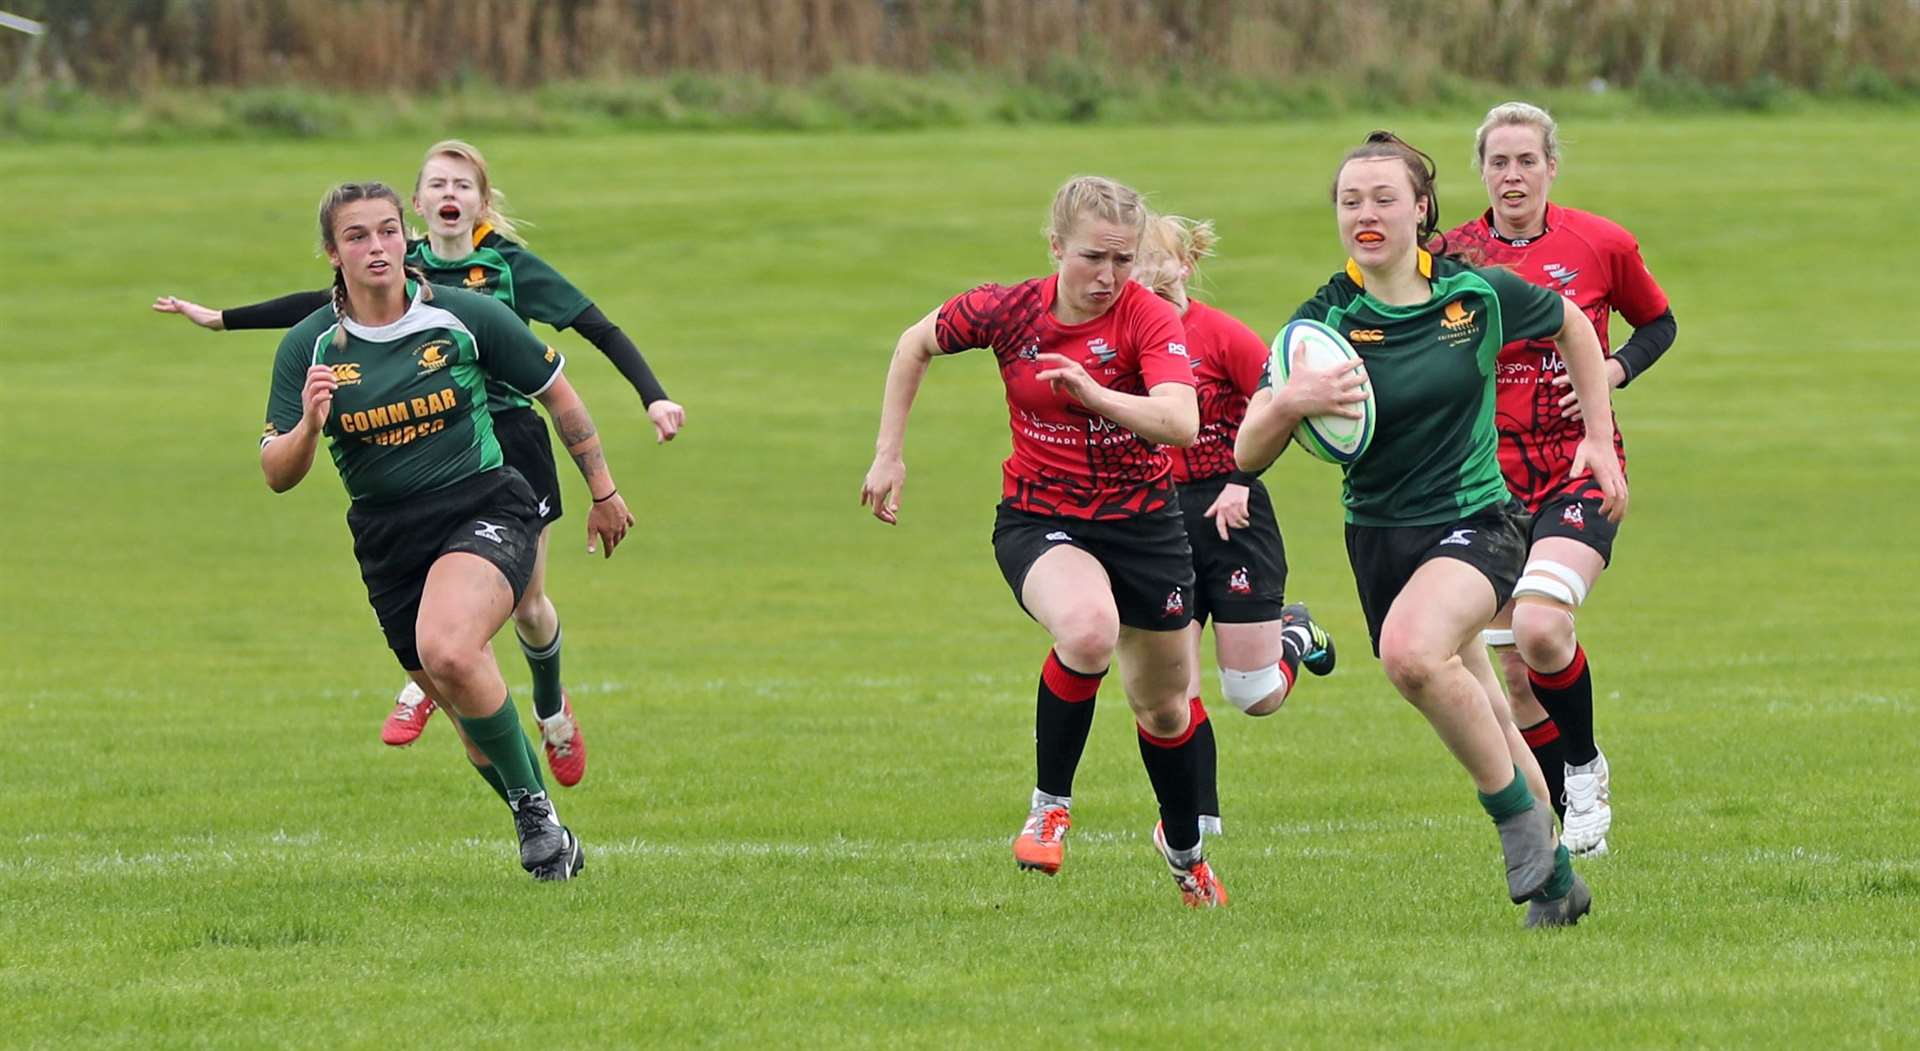 Shannon Pasotti races clear to score a try for Caithness Krakens against Orkney Dragons in the Caledonia North Region League. Picture: James Gunn